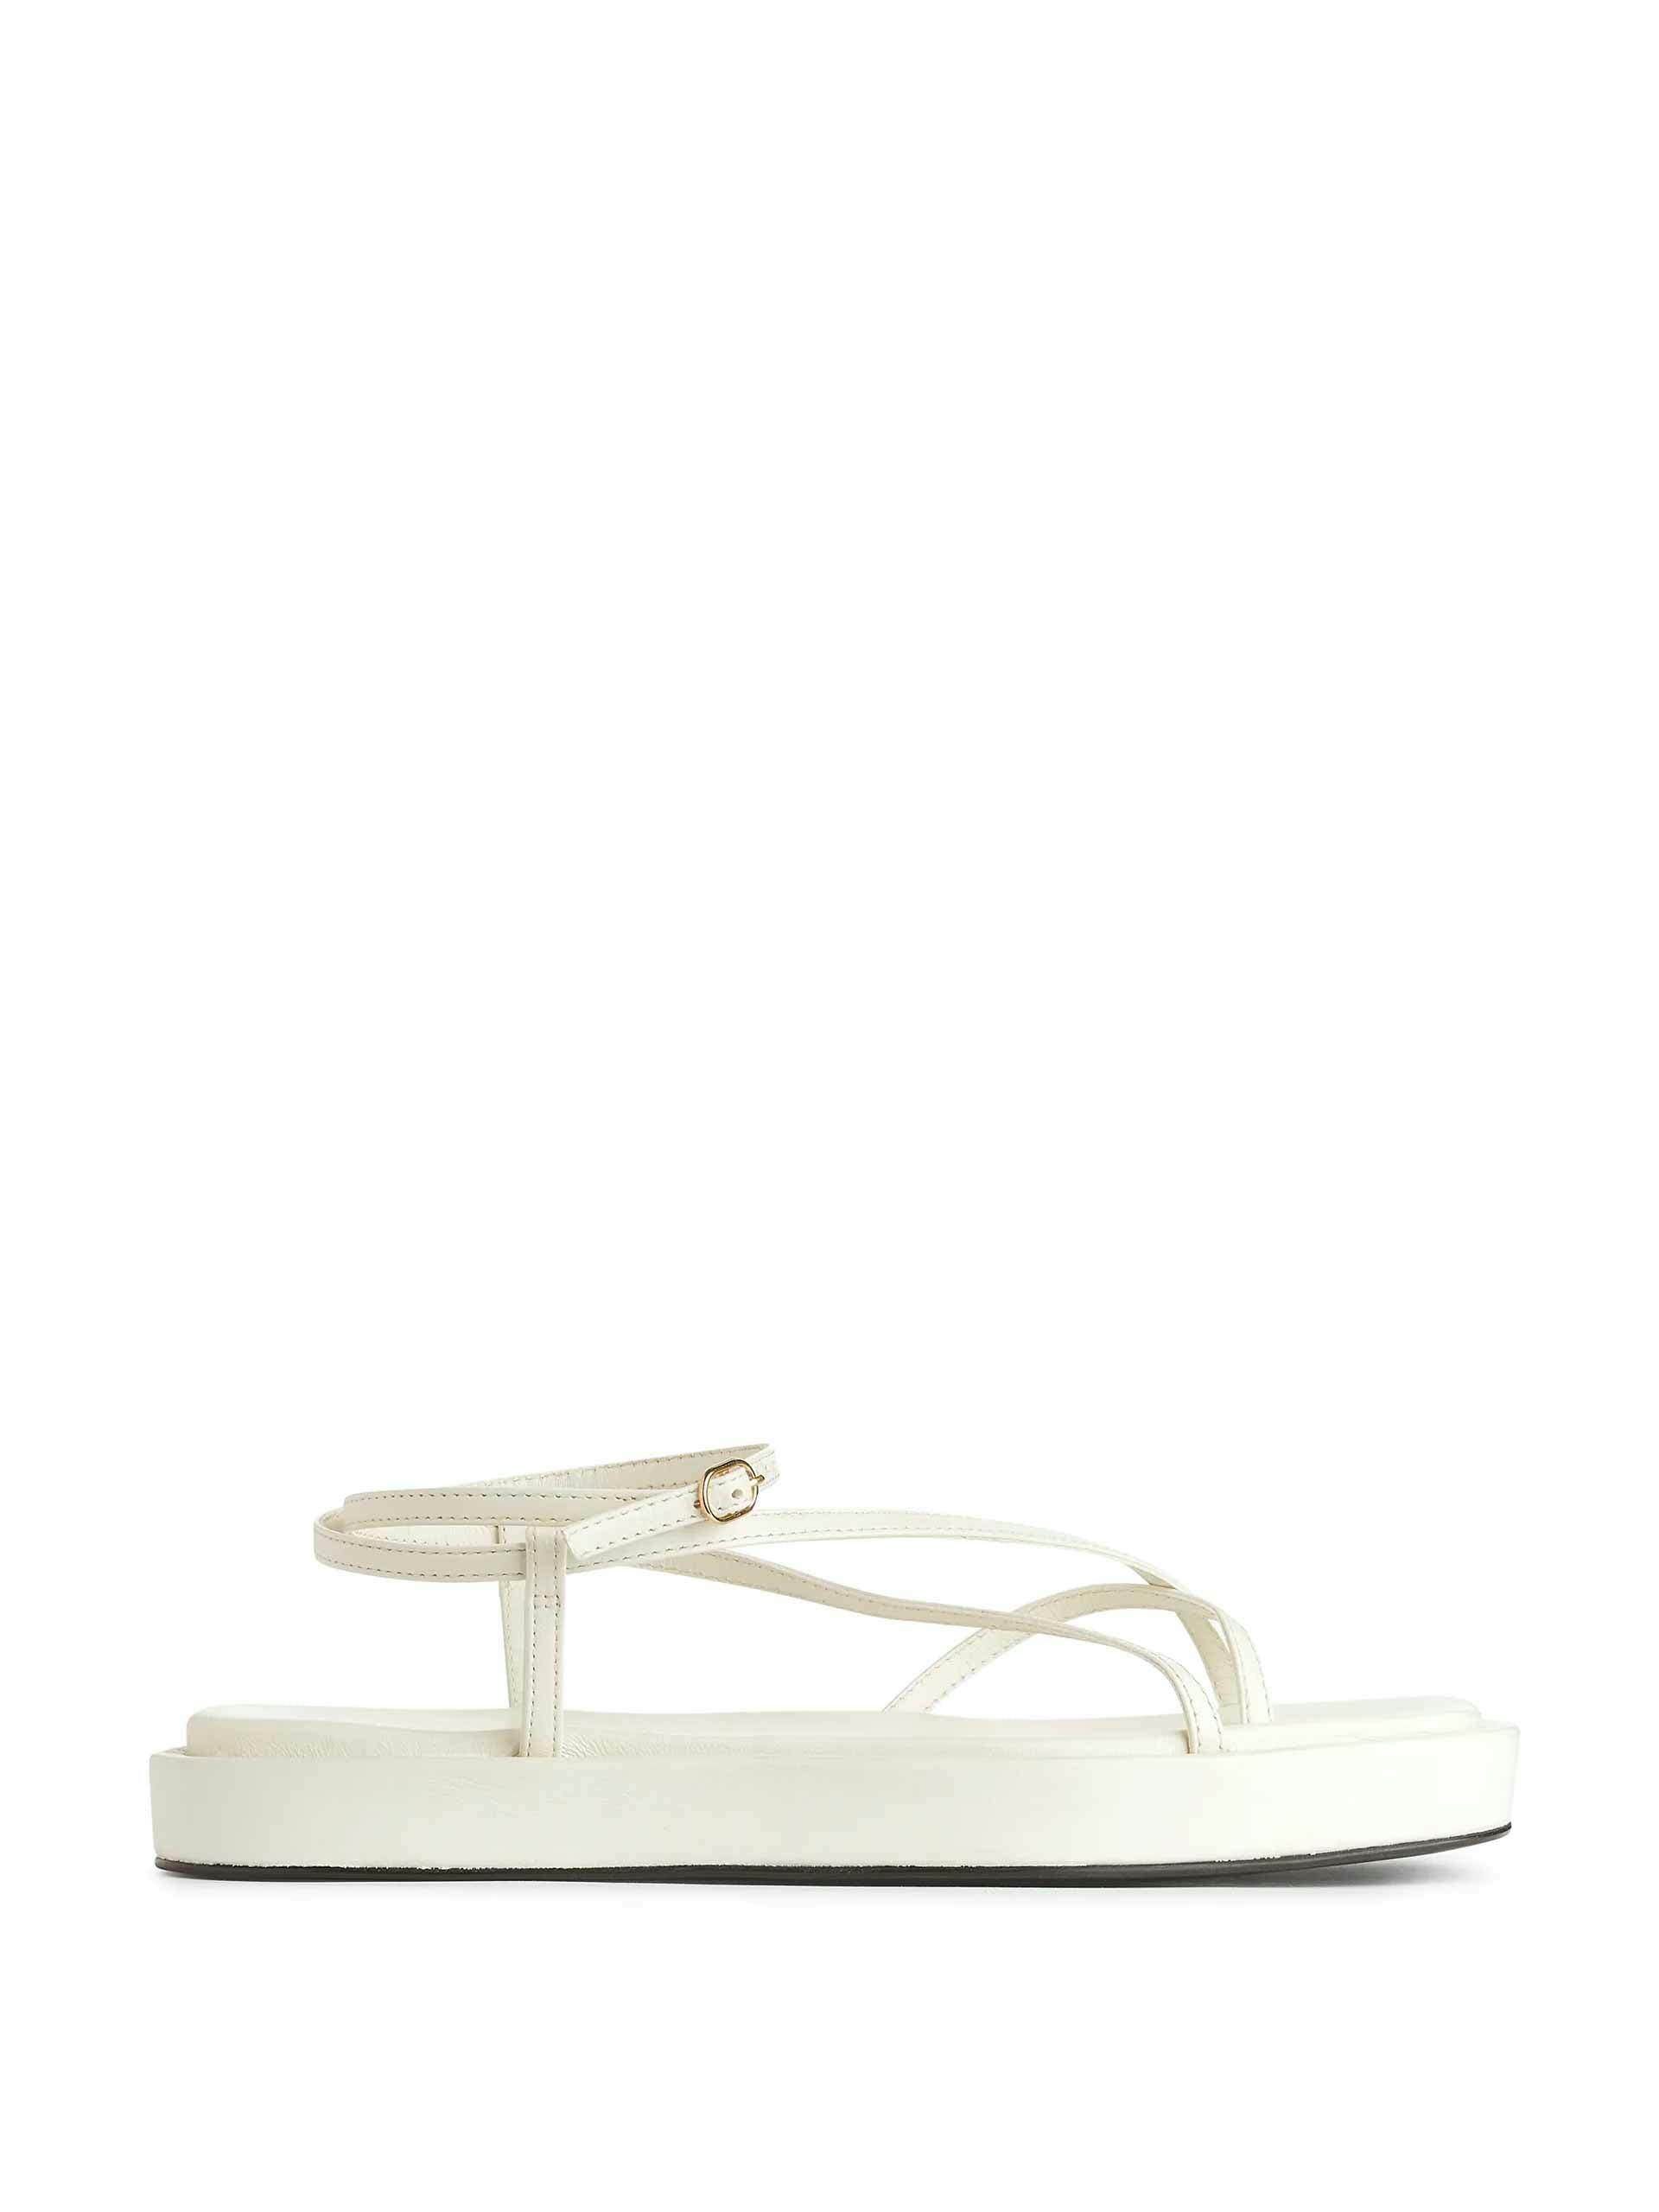 White leather strap sandals